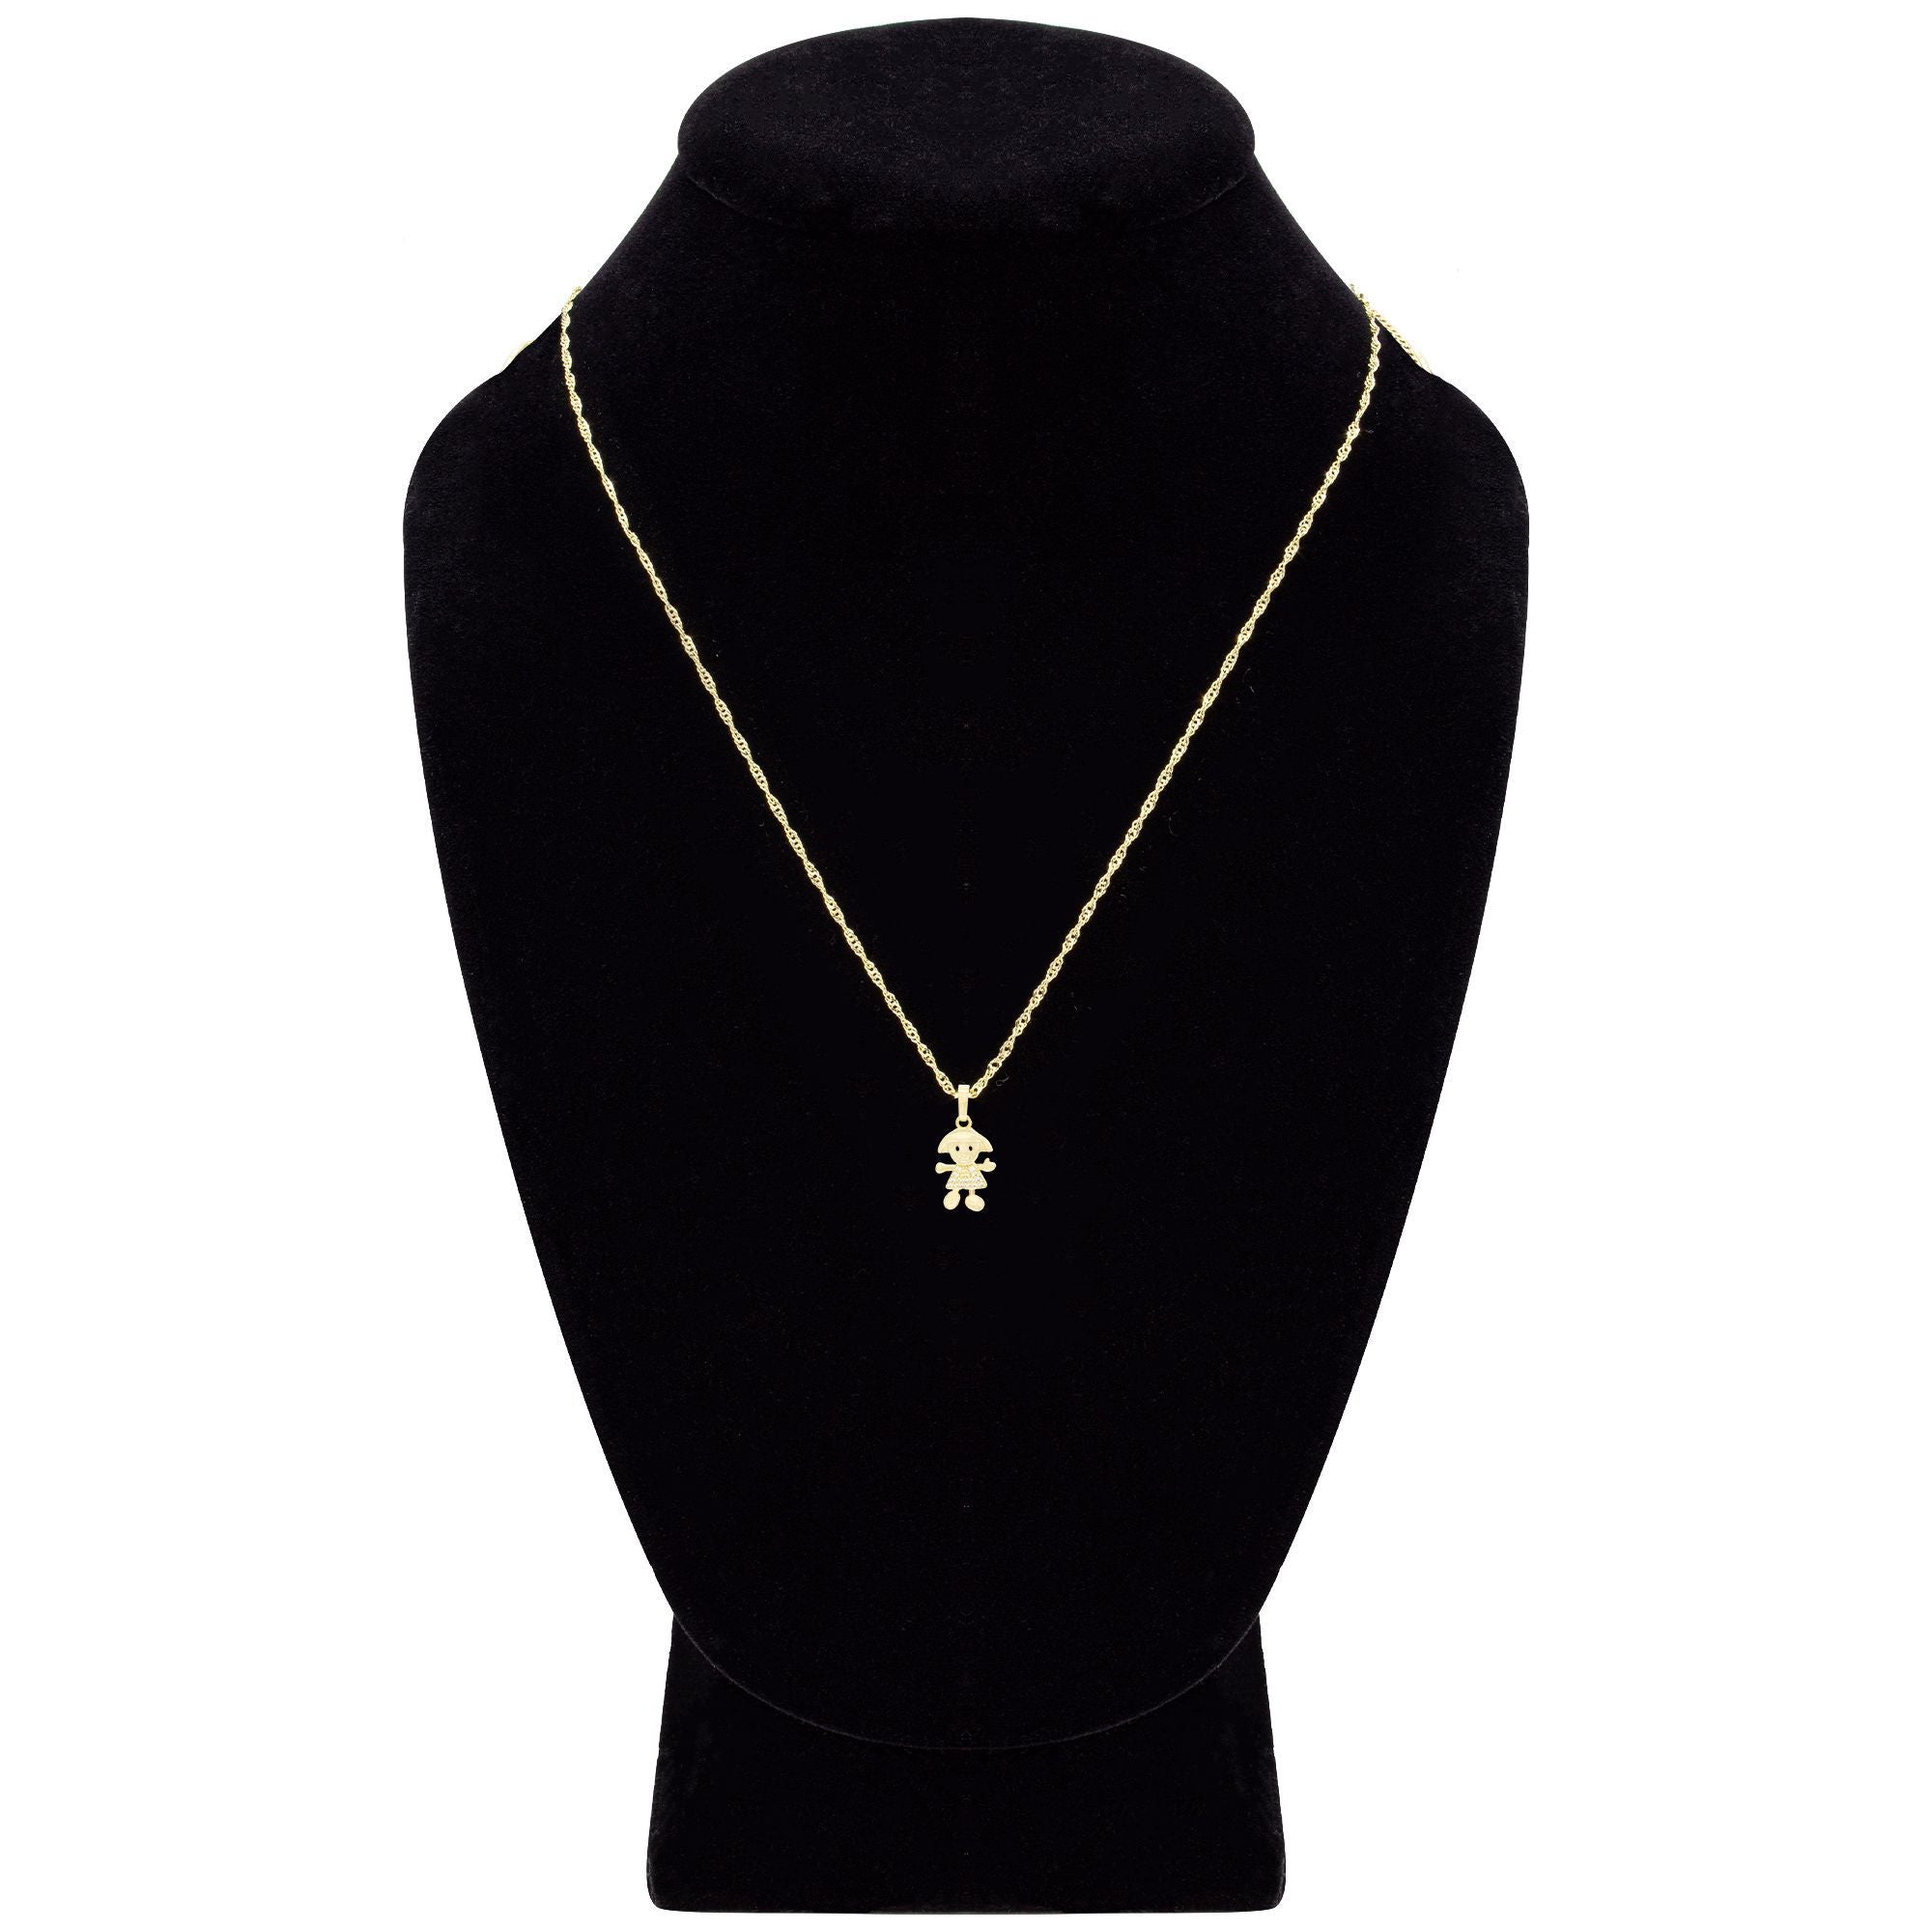 Happy Girl Cubic Zirconia Pendant With Necklace Set 14K Gold Filled